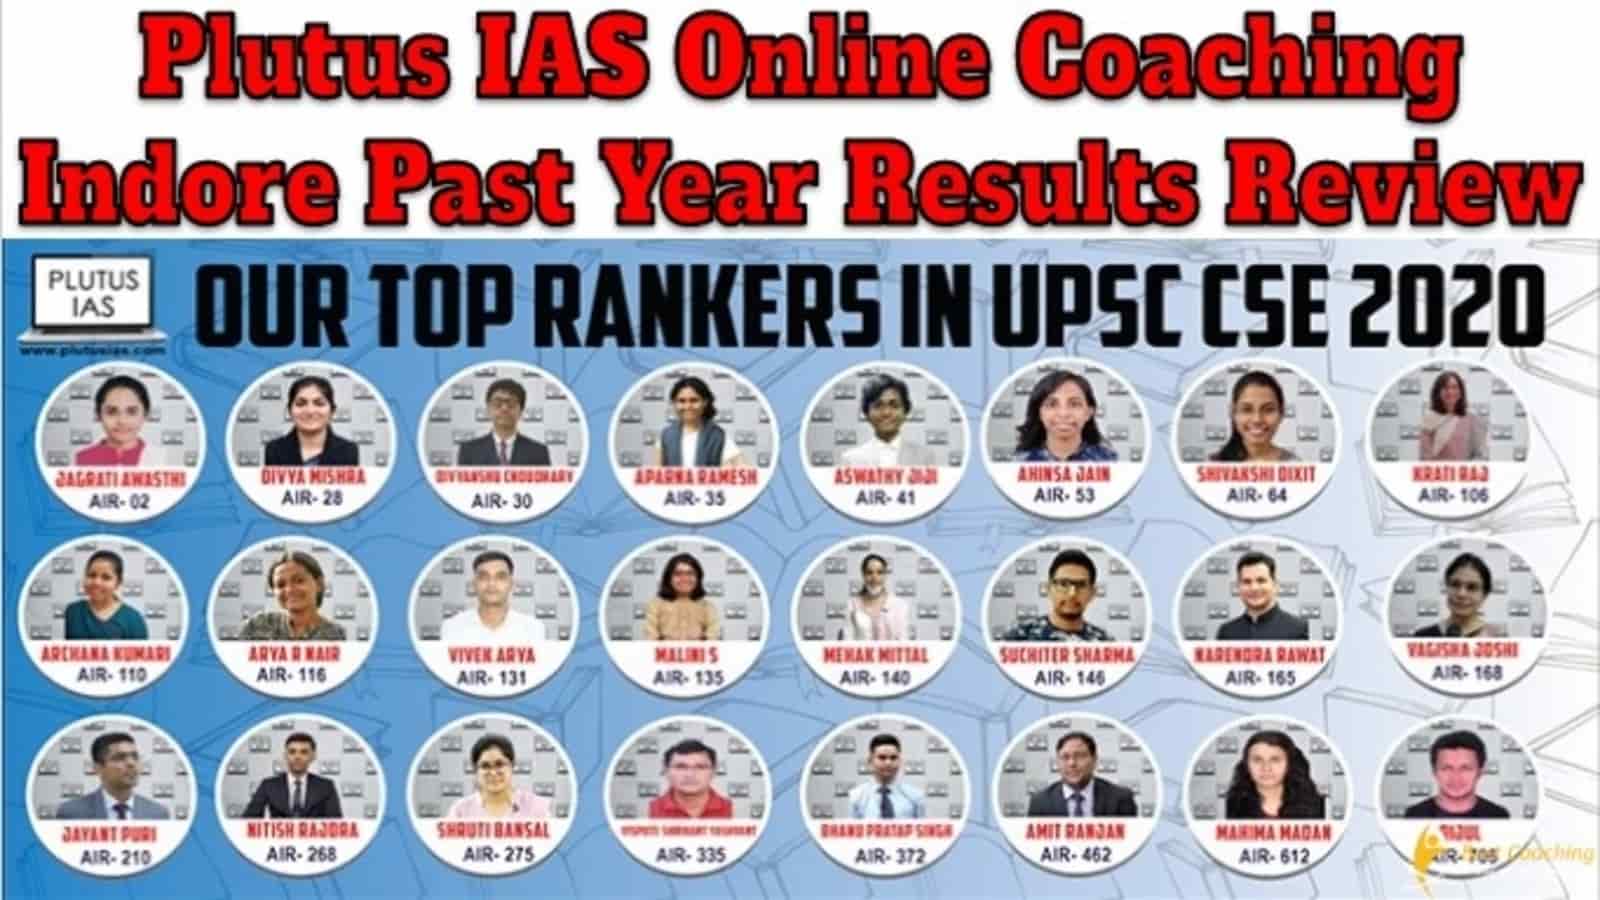 Plutus IAS Online Coaching Indore Past Year Results Review